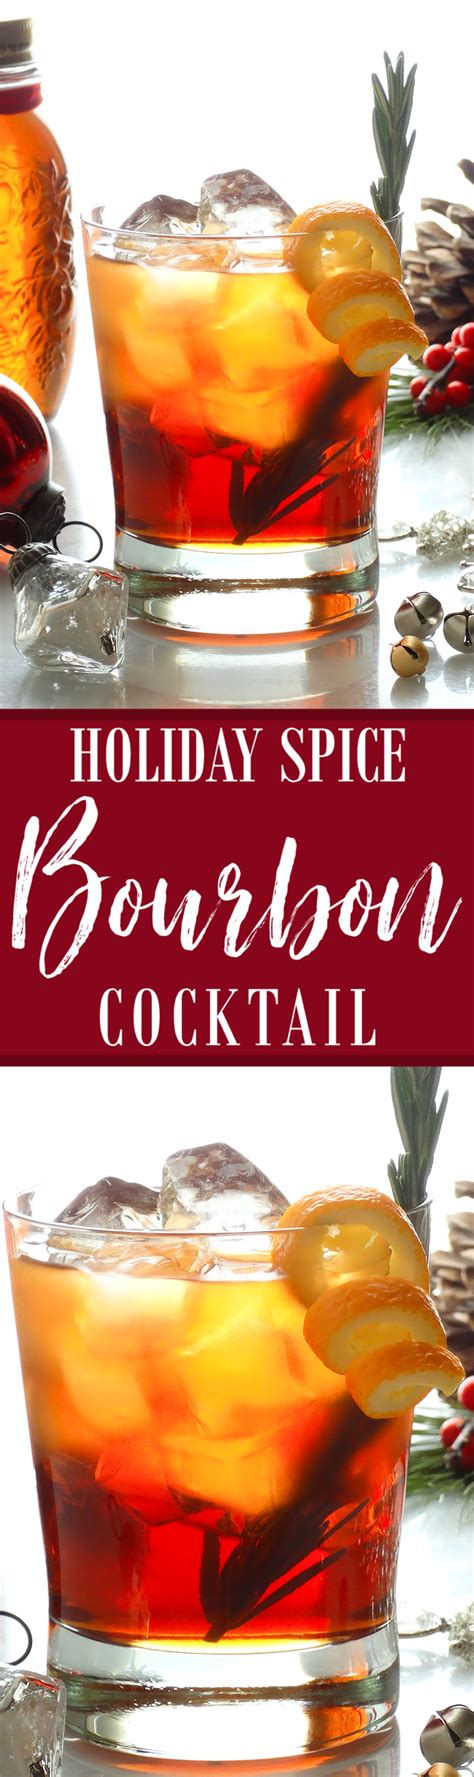 With cocktails like christmas cosmos, peppermint martinis and holiday mimosas, we'll this is the perfect drink for your christmas cocktail parties! Holiday Spice Bourbon Cocktail ~ The perfect wintertime ...